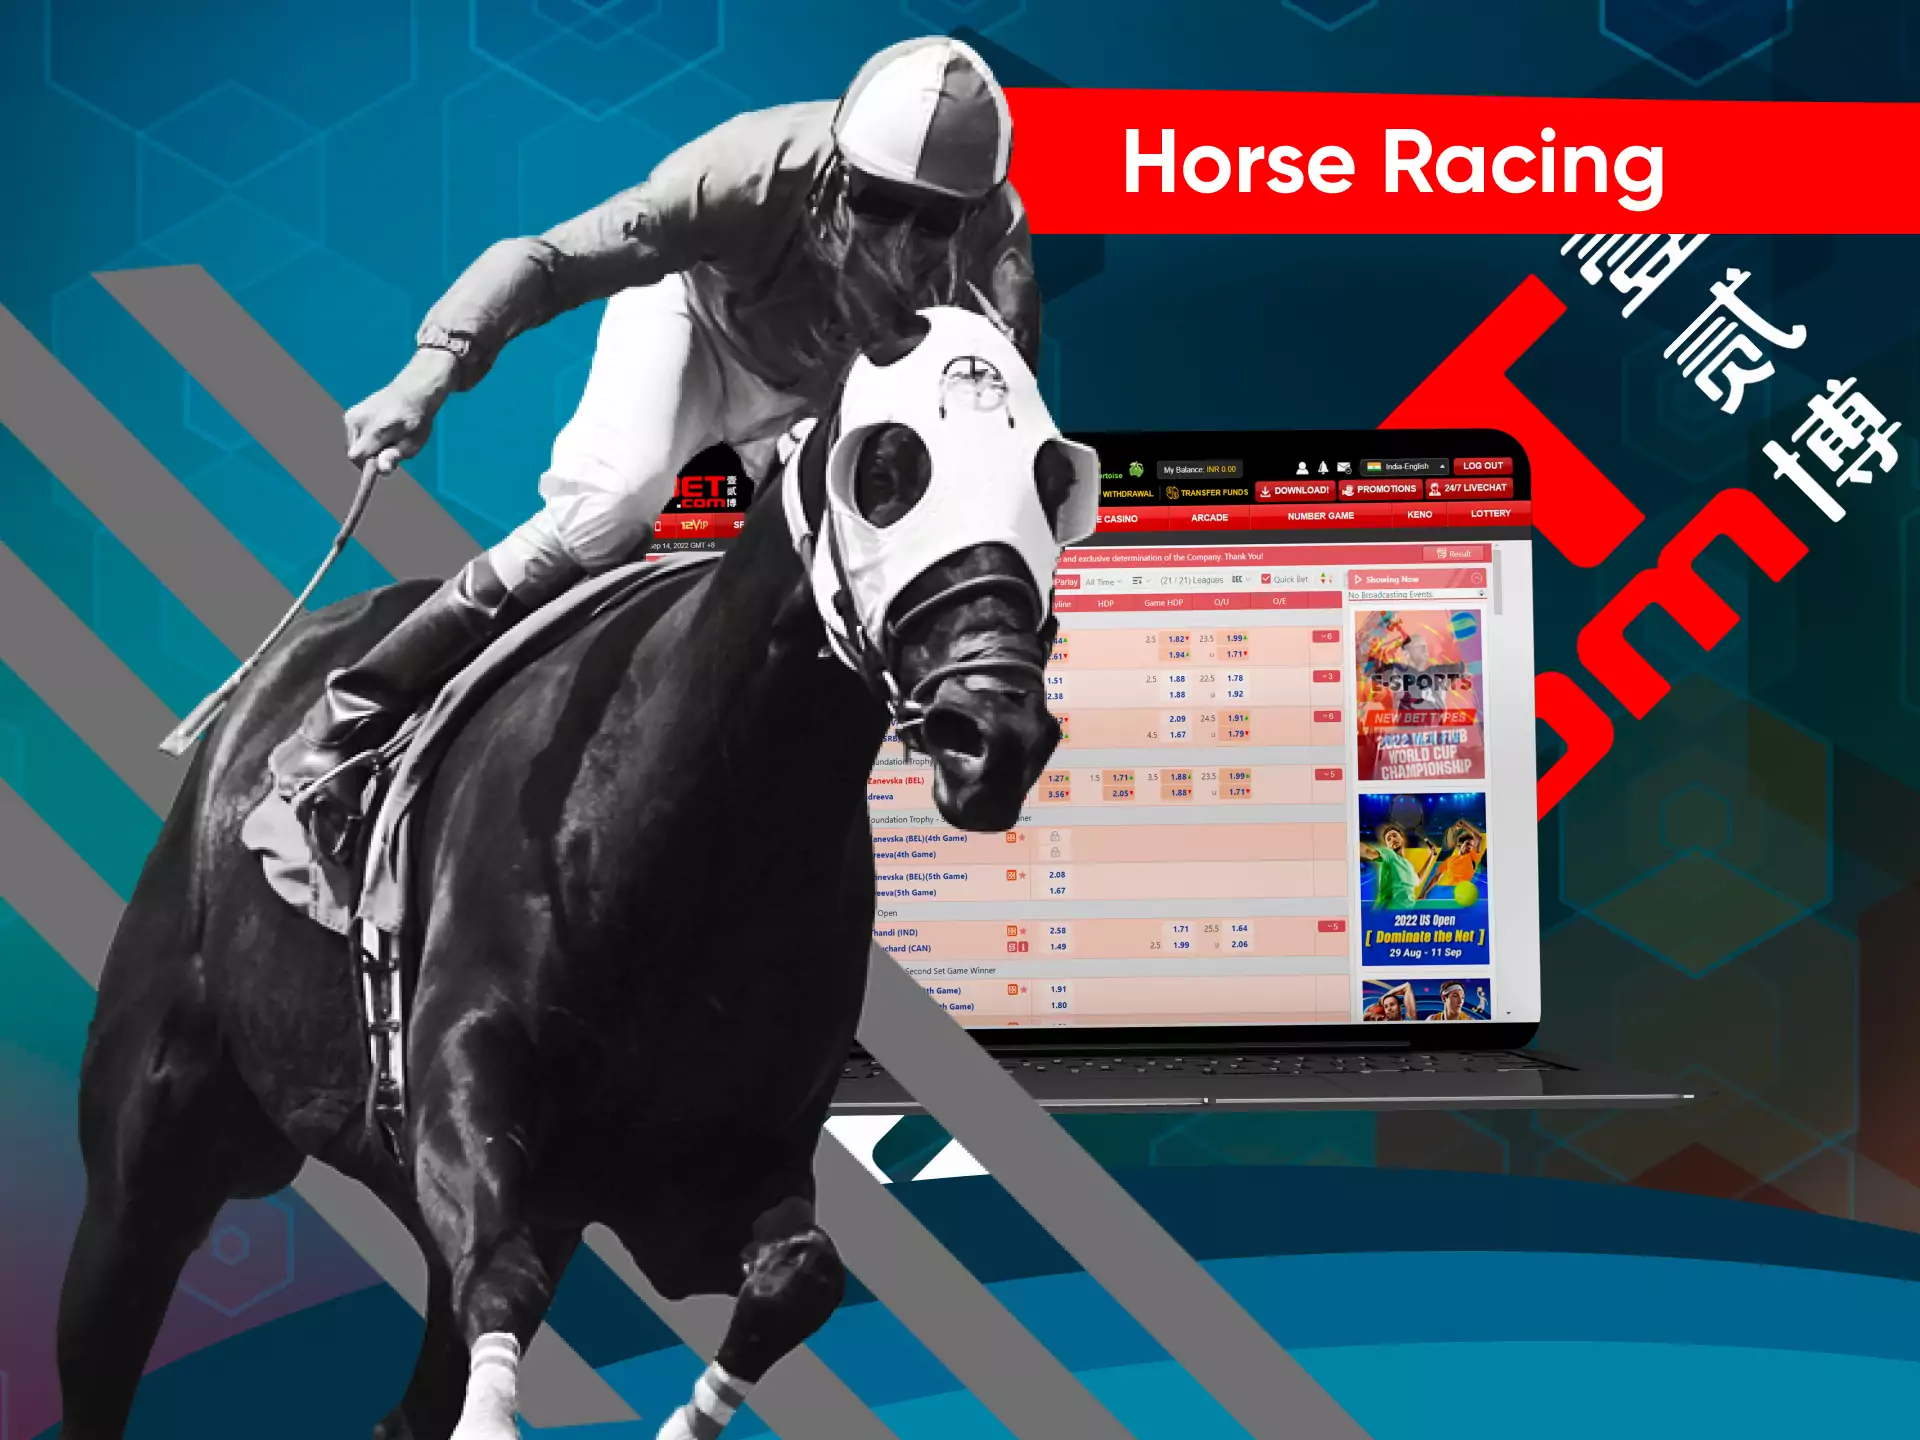 On 12bet, you can bet on horse racing.